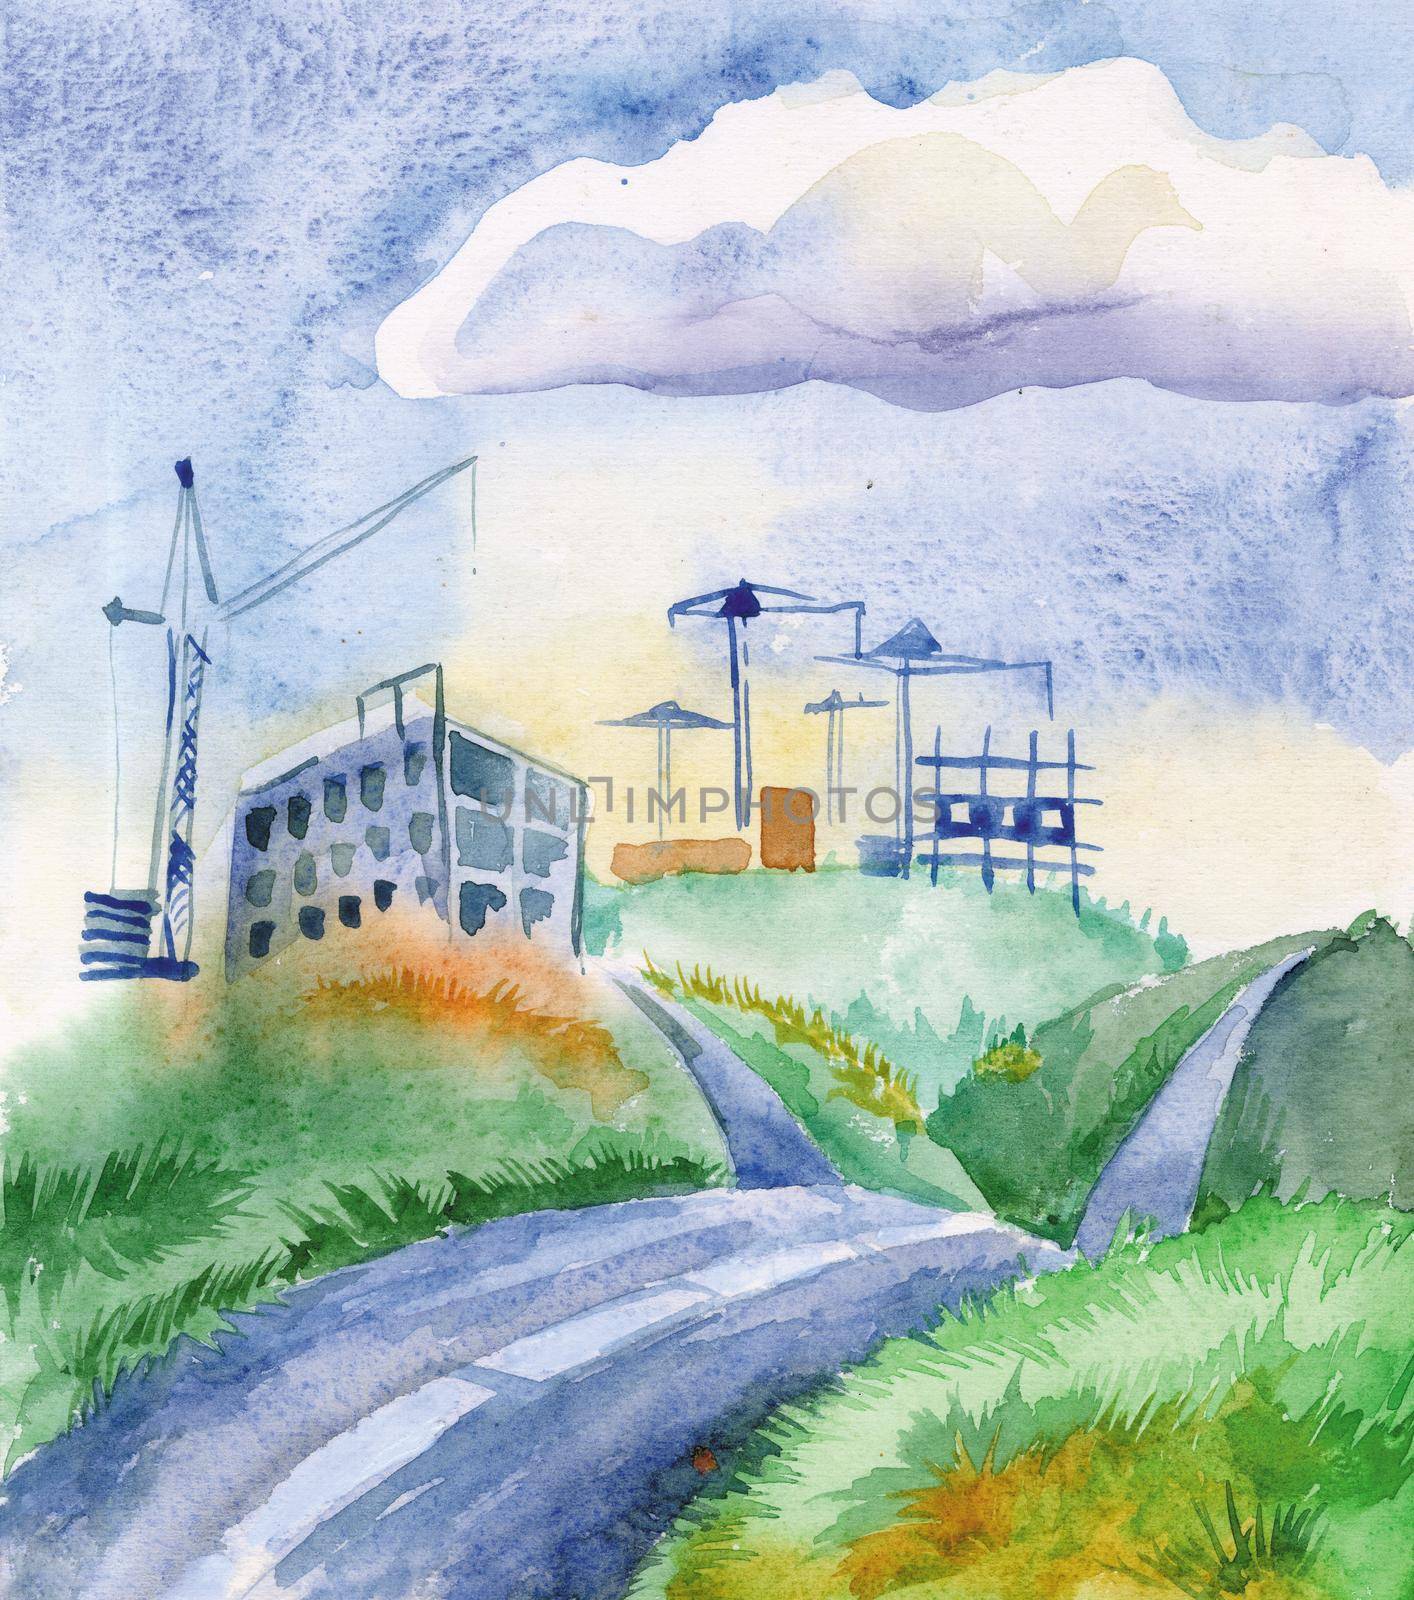 Unfinished buildings with building cranes, located on the hills. To them there is a winding road